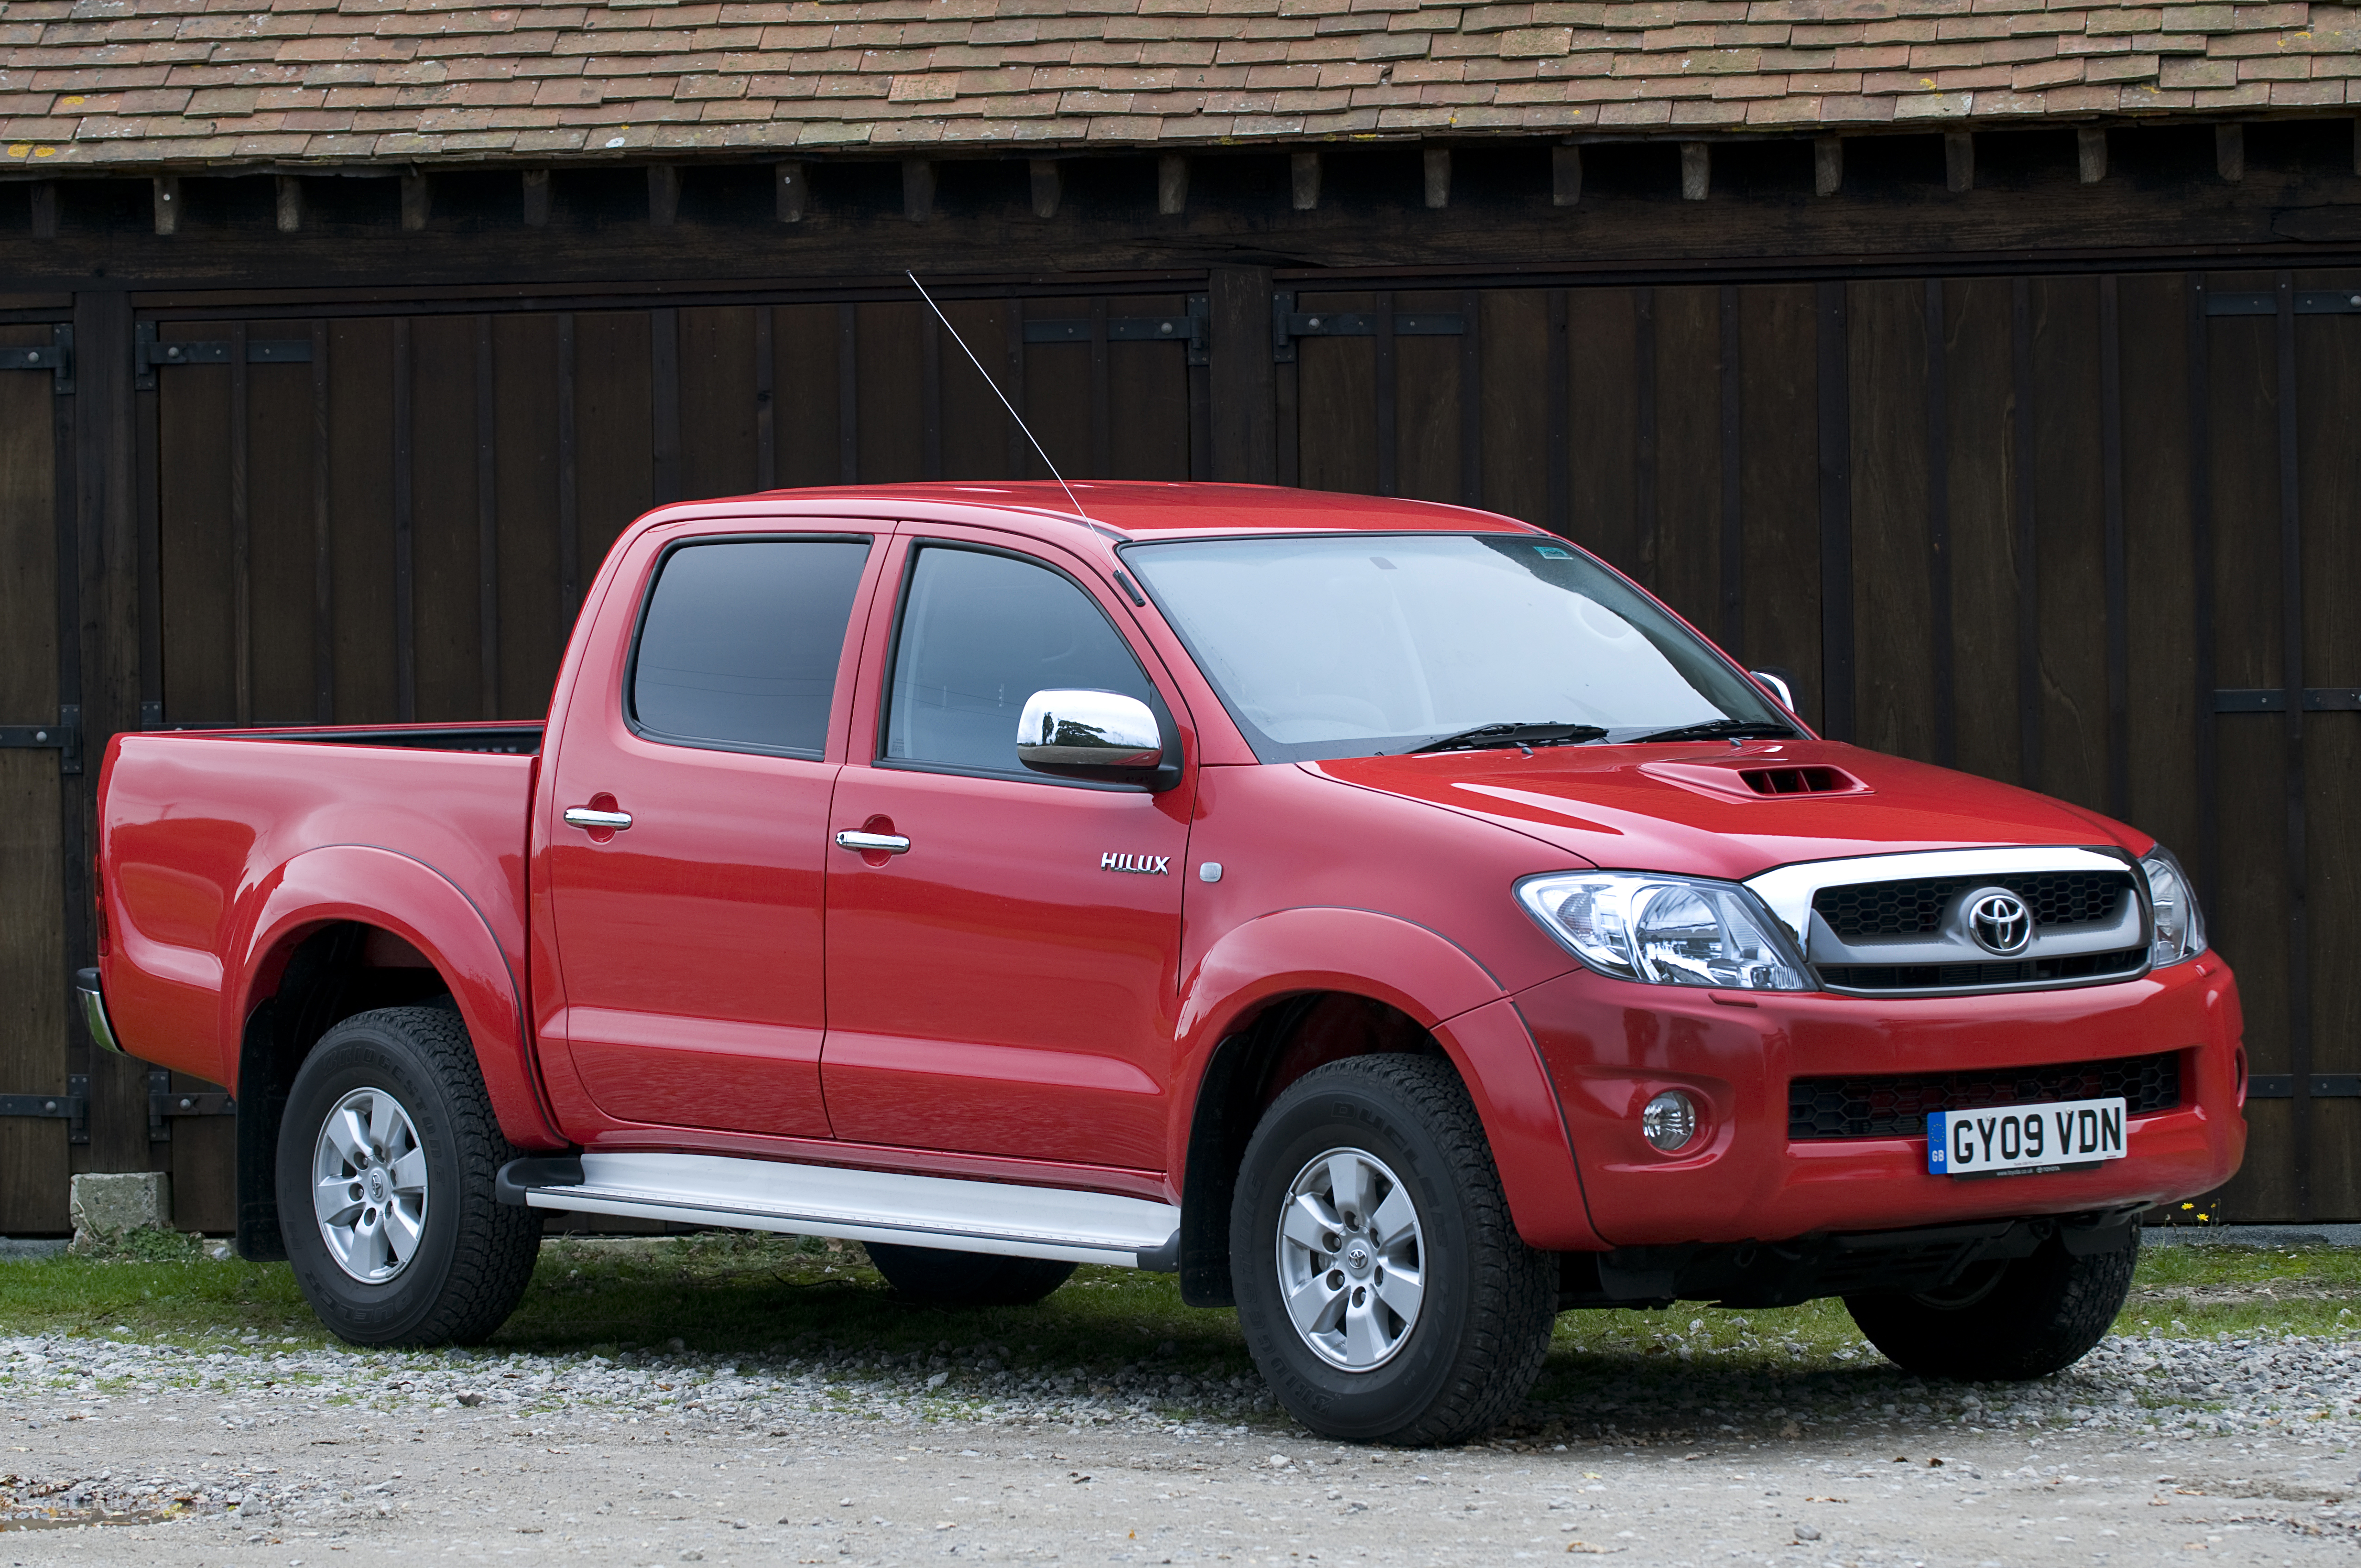 2009 Toyota HiLux pick up truck. Artist Unknown. (Photo by National Motor Museum/Heritage Images/Getty Images)